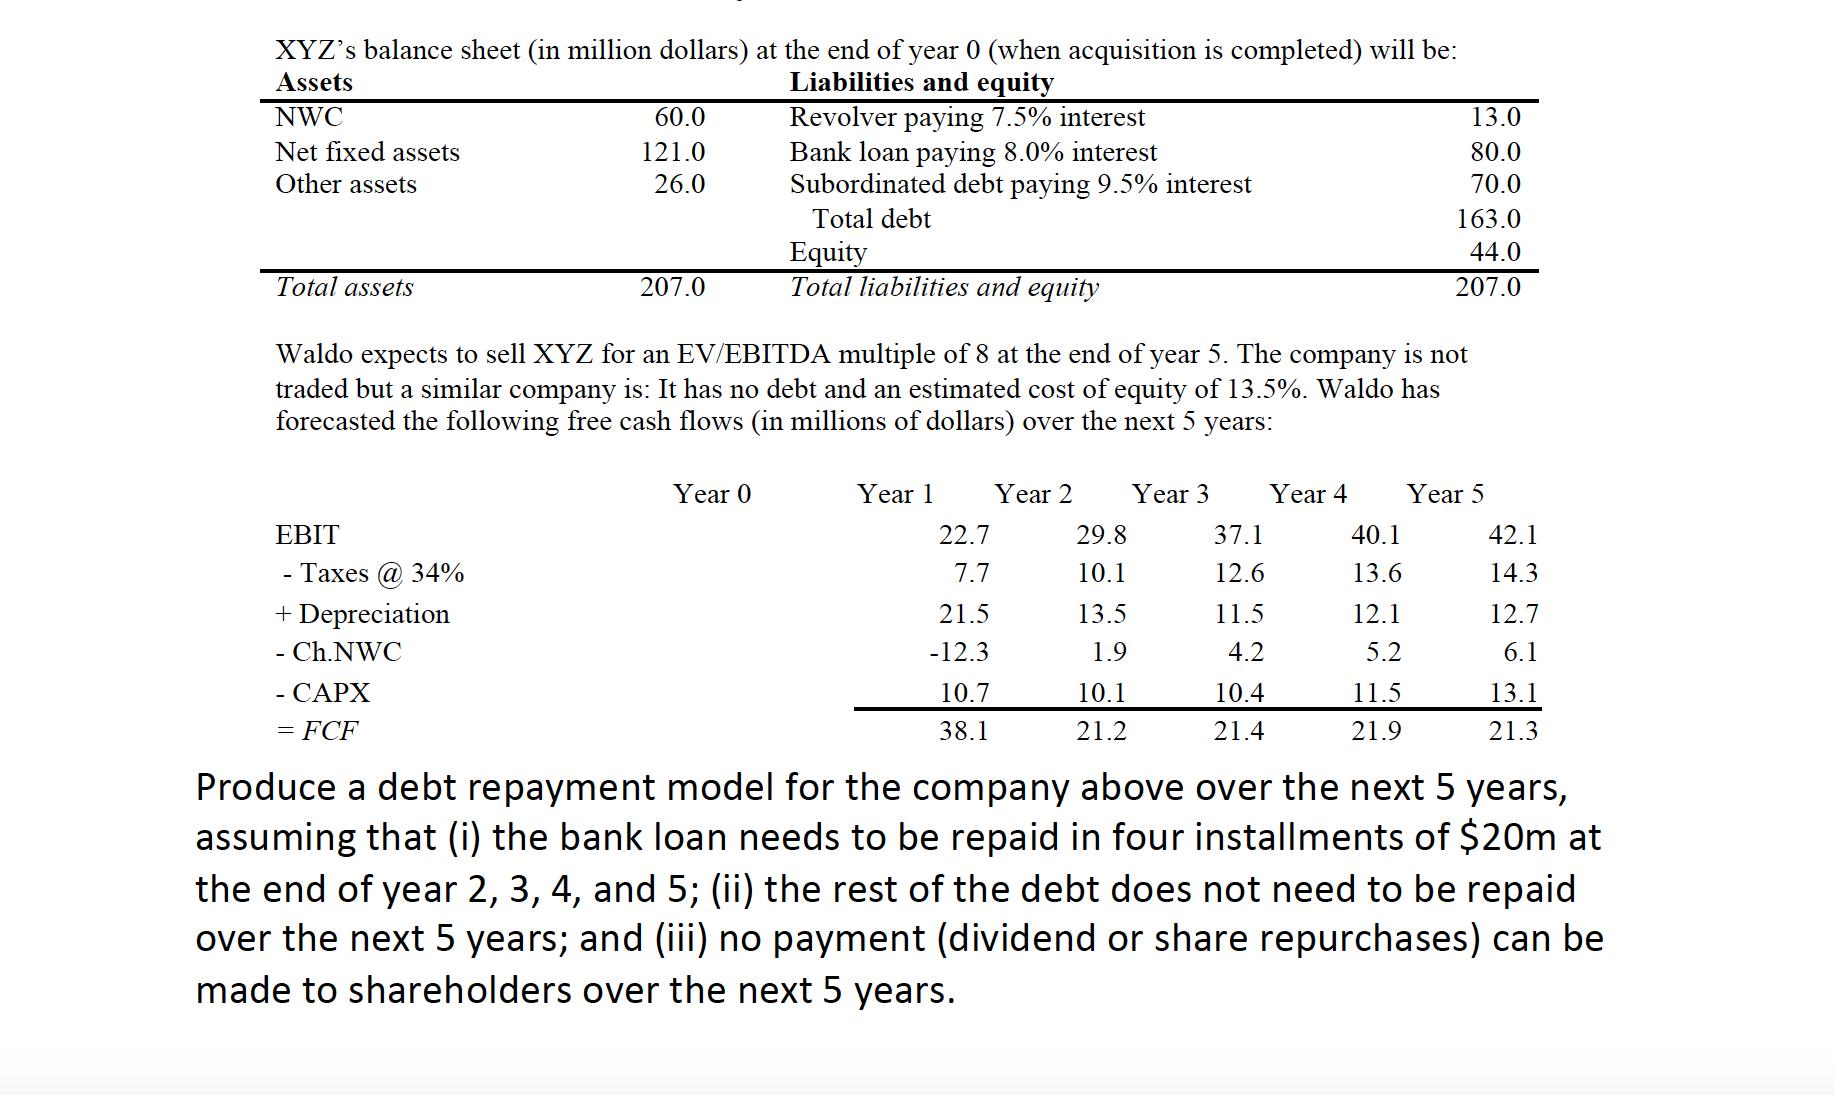 XYZ's balance sheet (in million dollars) at the end of year 0 (when acquisition is completed) will be: Assets